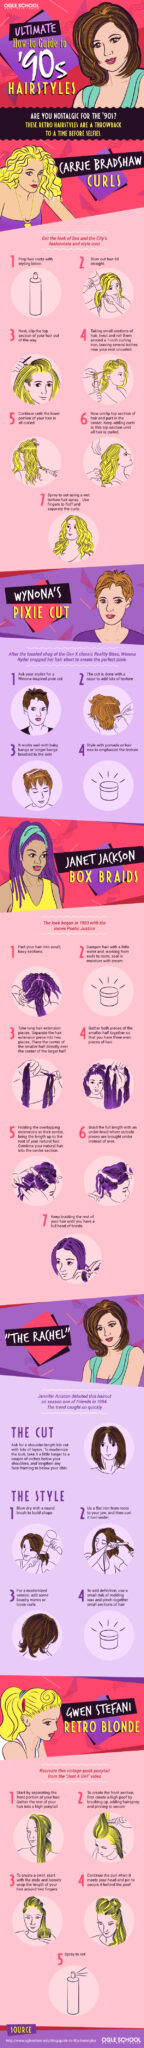 Ultimate-How-to-Guide-to-90s-Hairstyles_IG